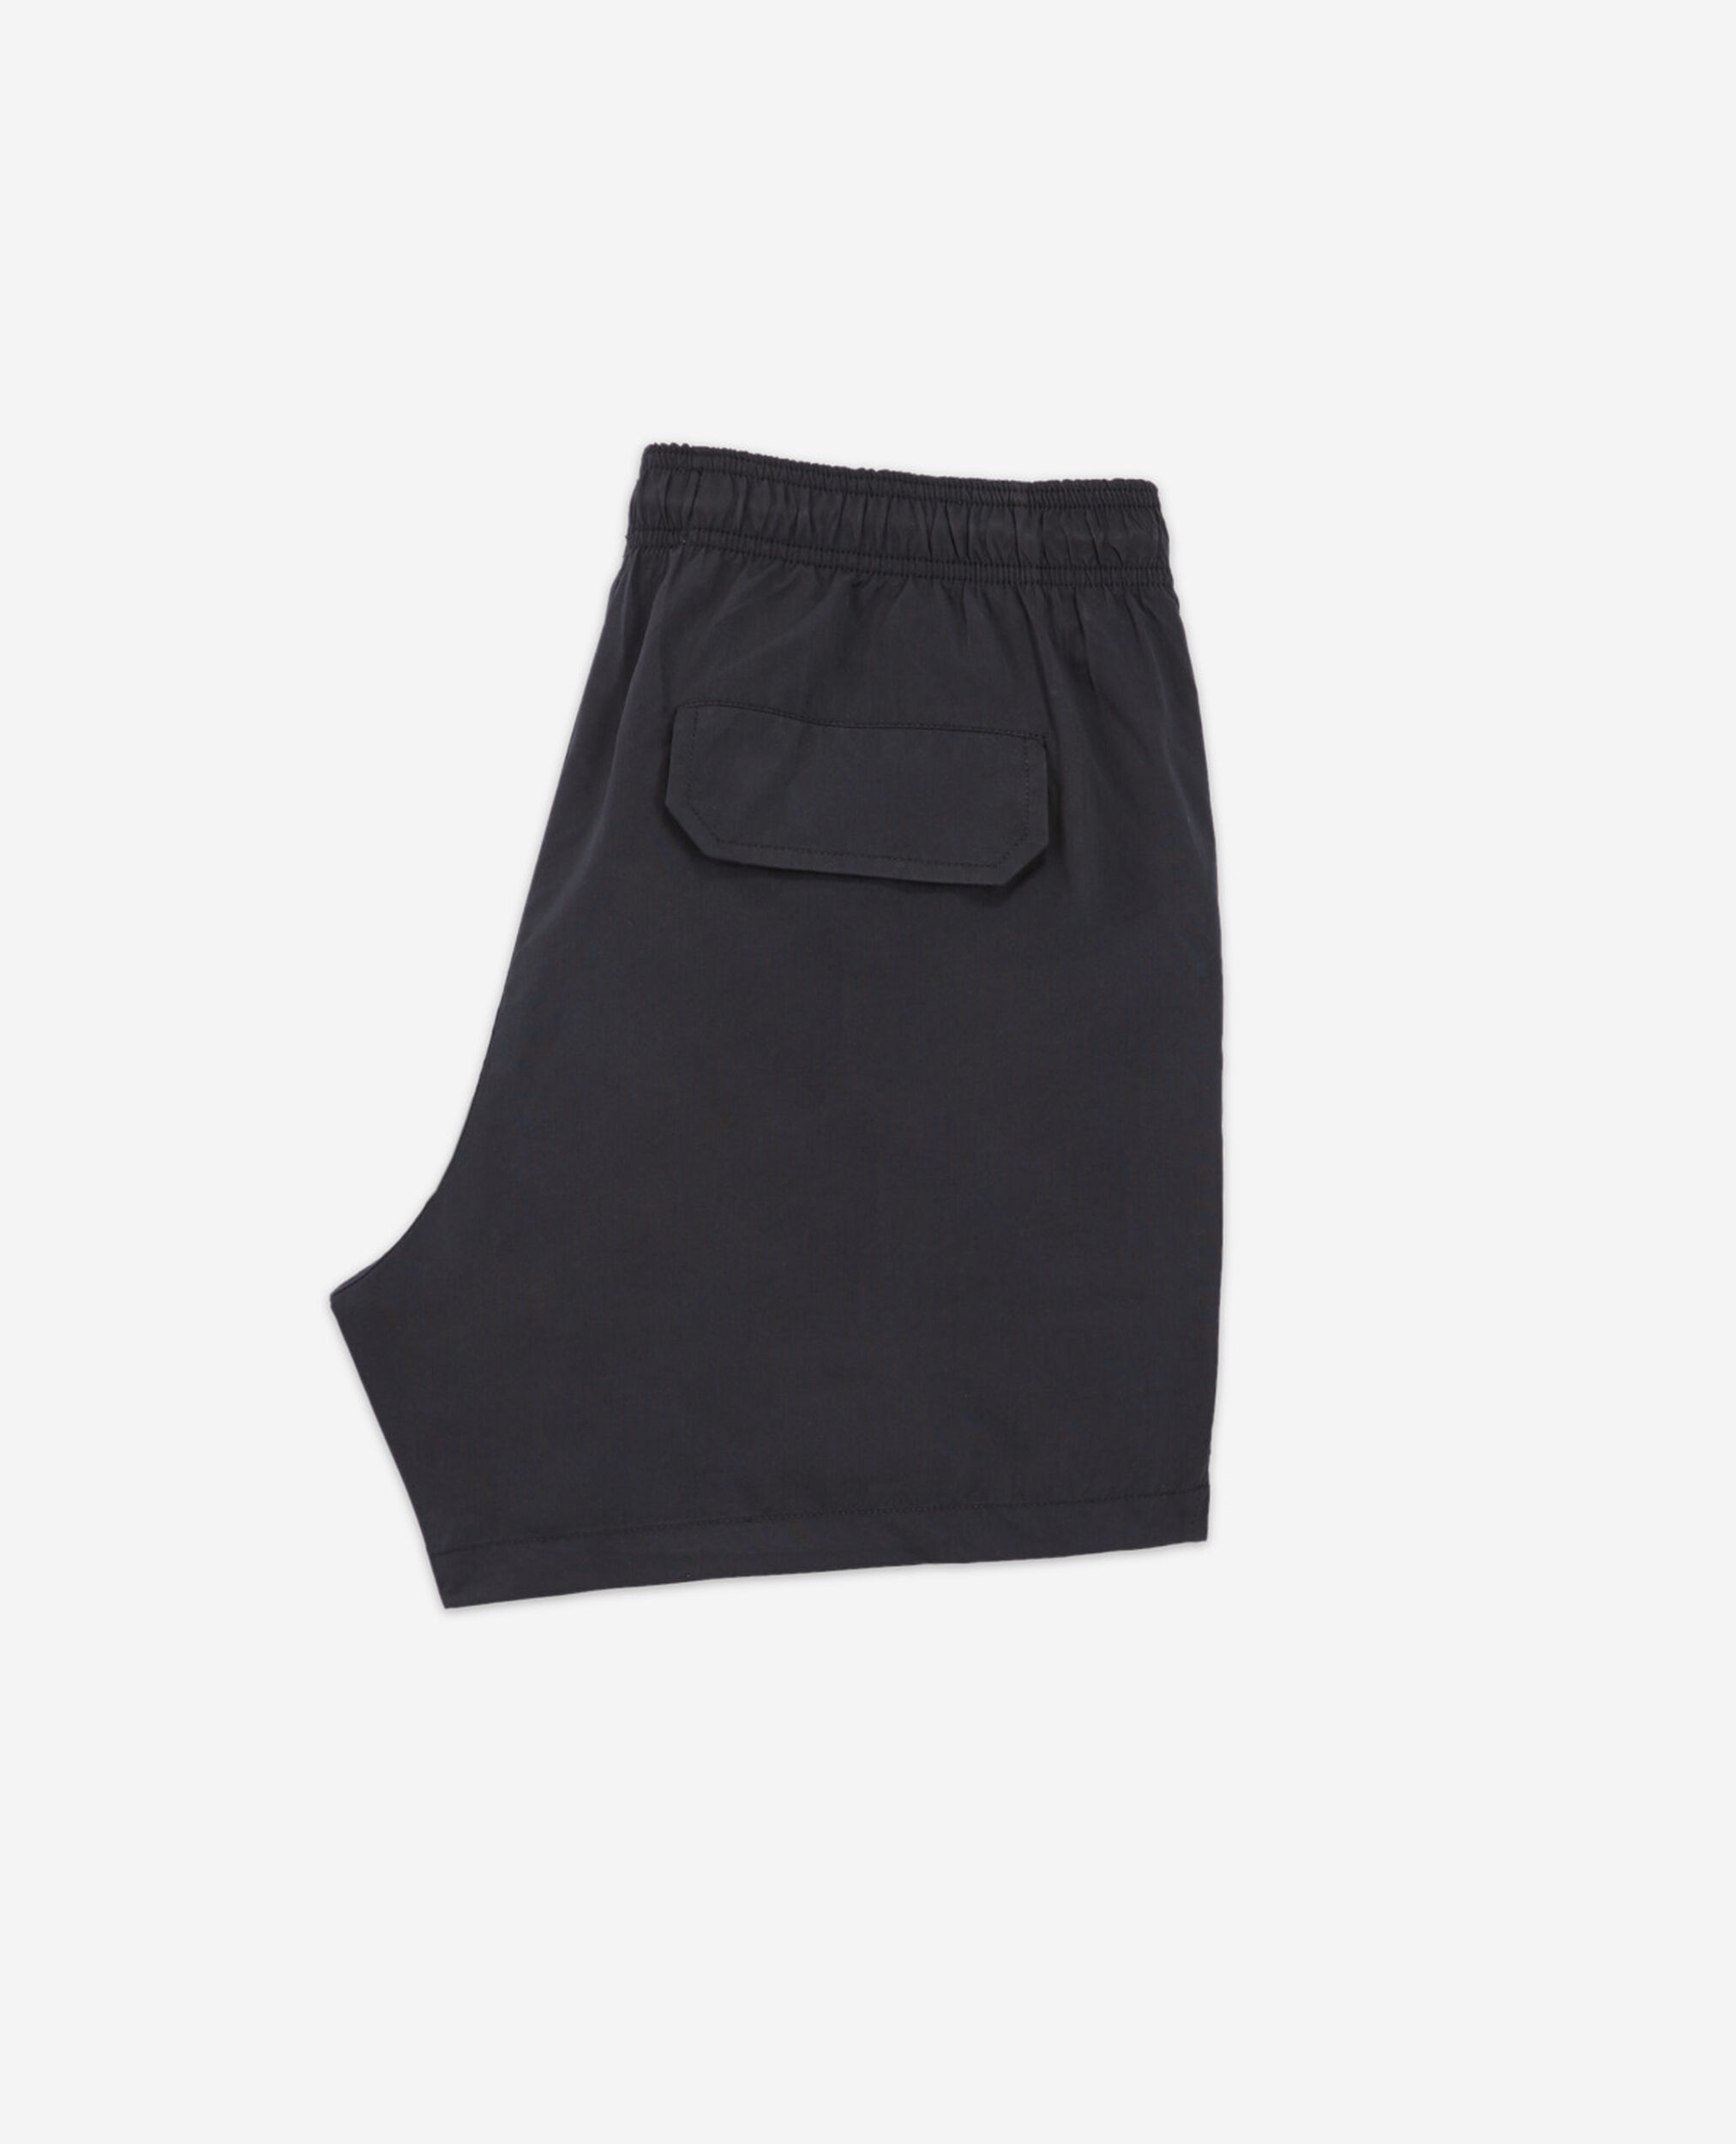 Black swim shorts with small The Kooples logo, BLACK, hi-res image number null